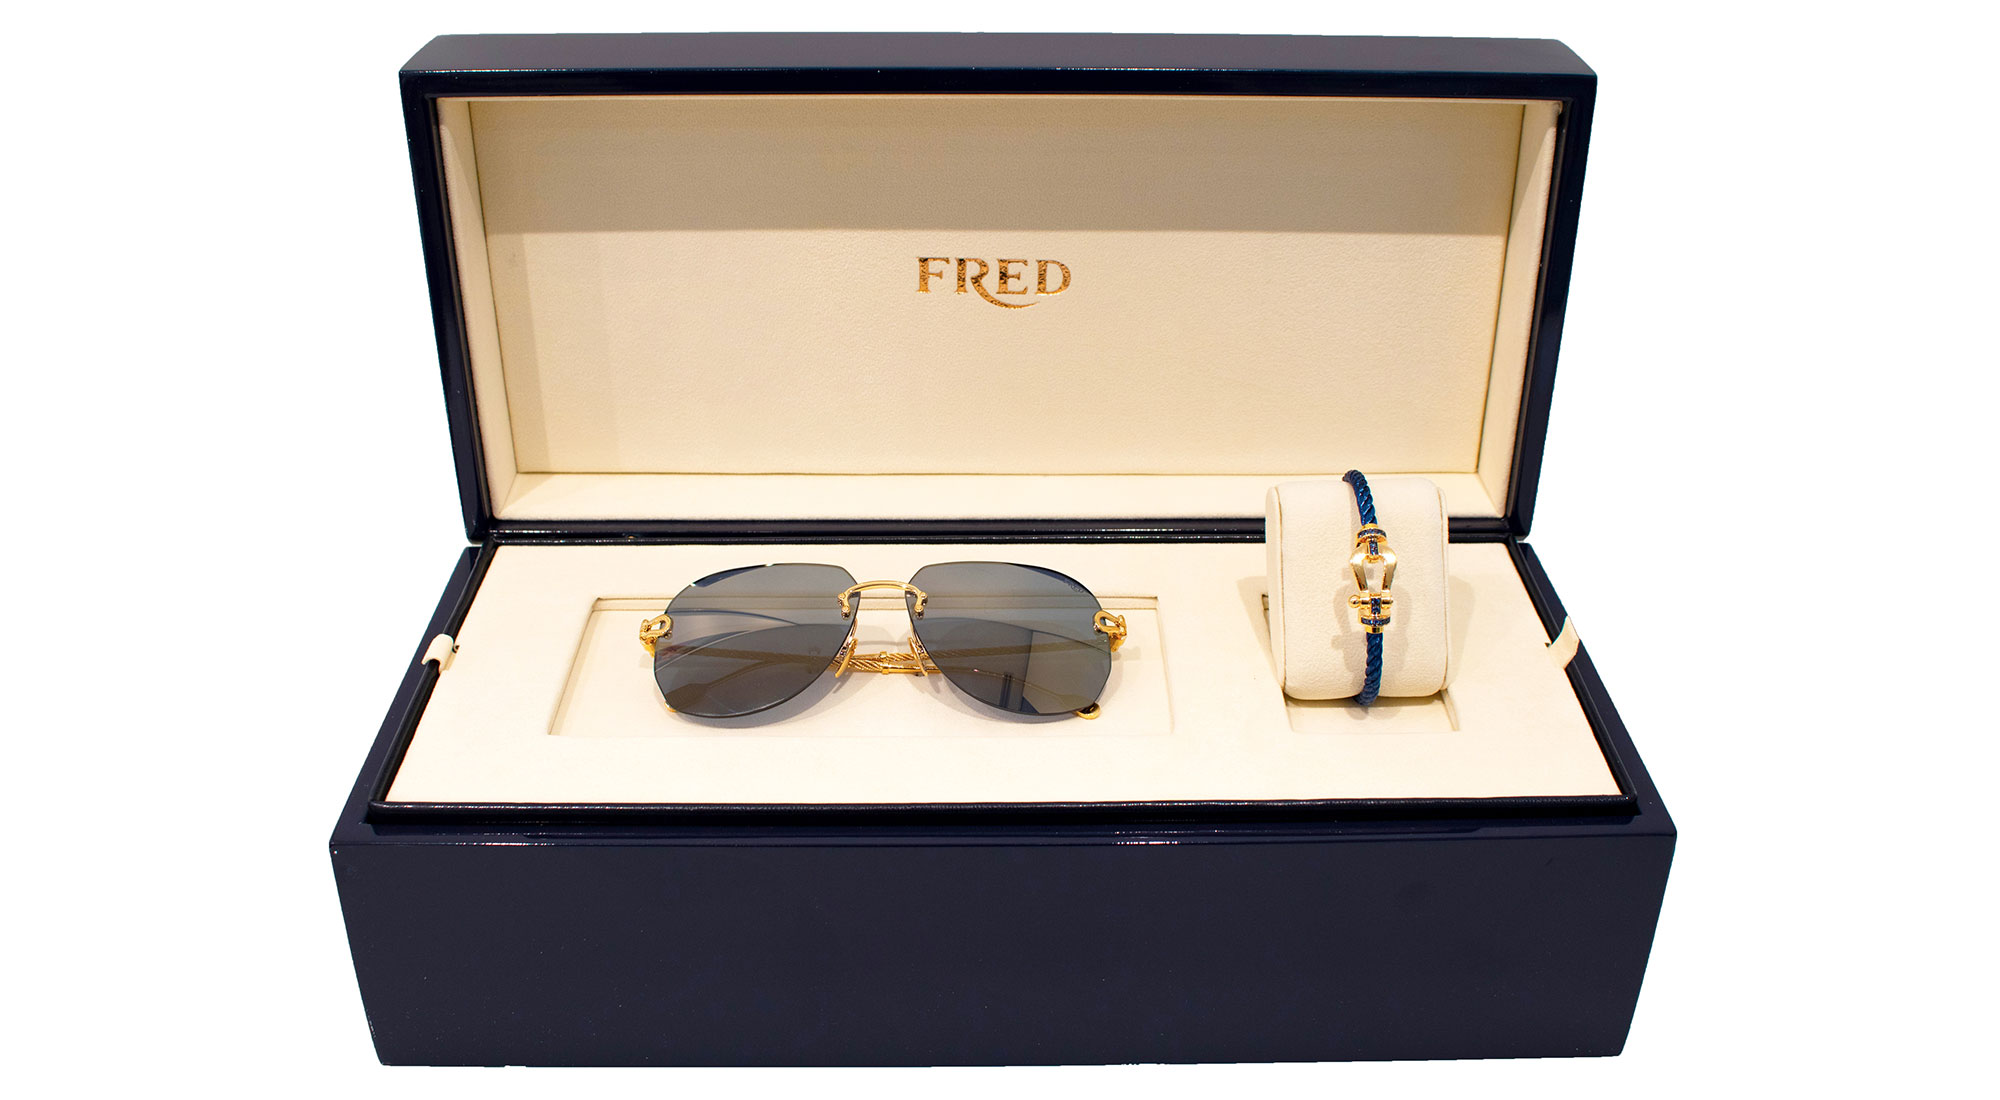 Fred Force 10 – The Brand Collector